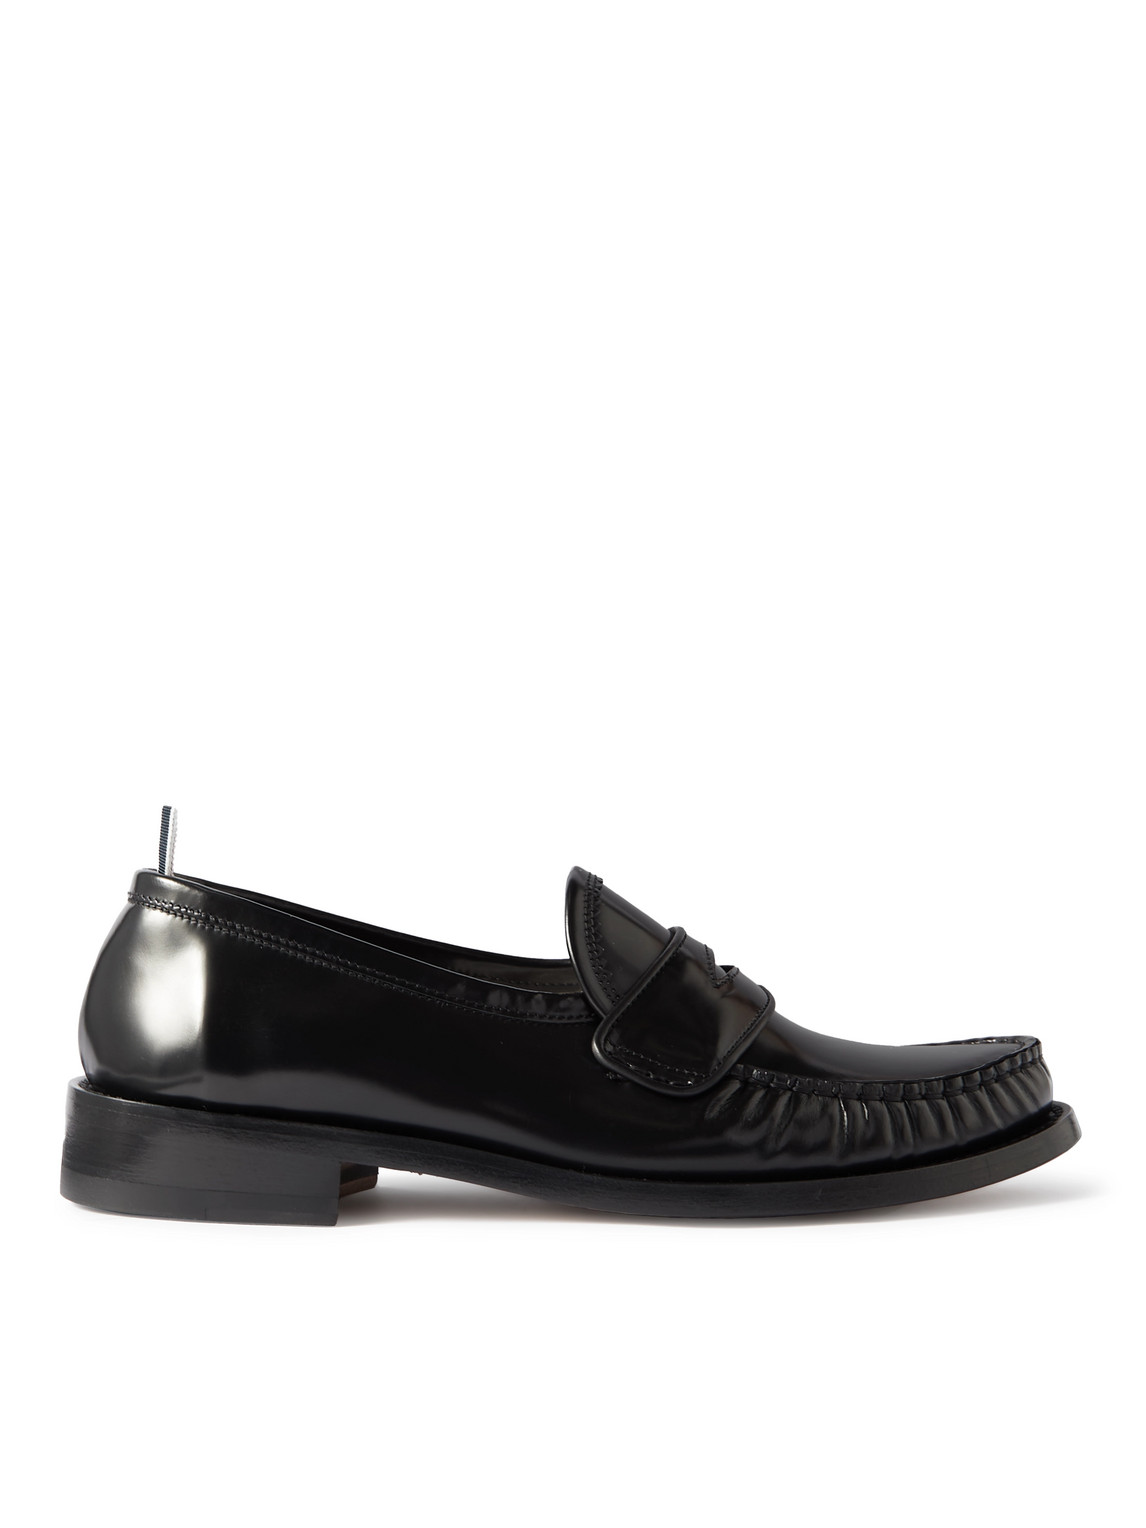 THOM BROWNE VARSITY PATENT-LEATHER PENNY LOAFERS